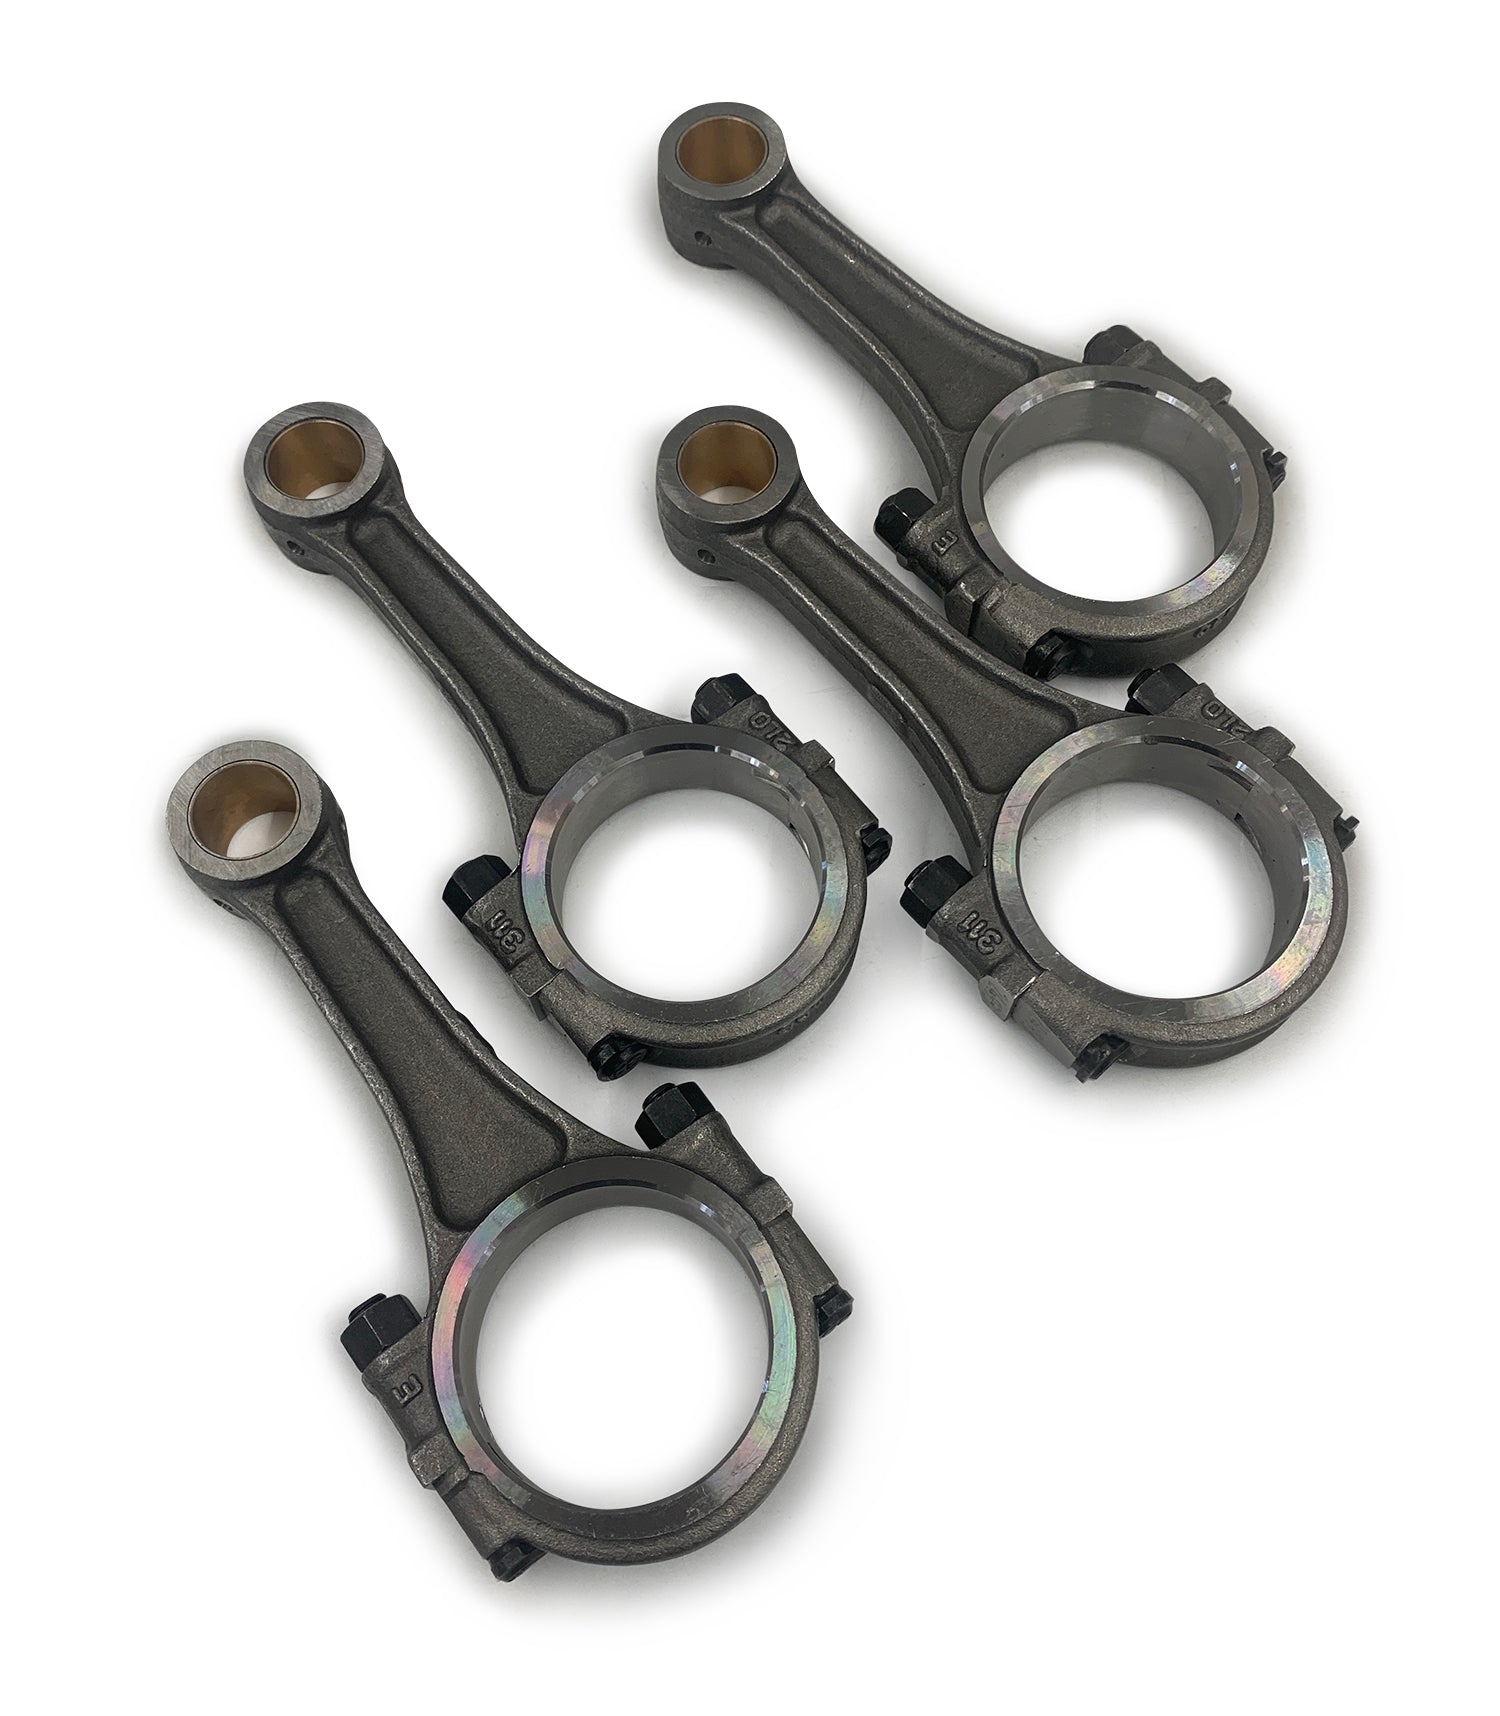 New Stock Connecting Rods 1300-1600